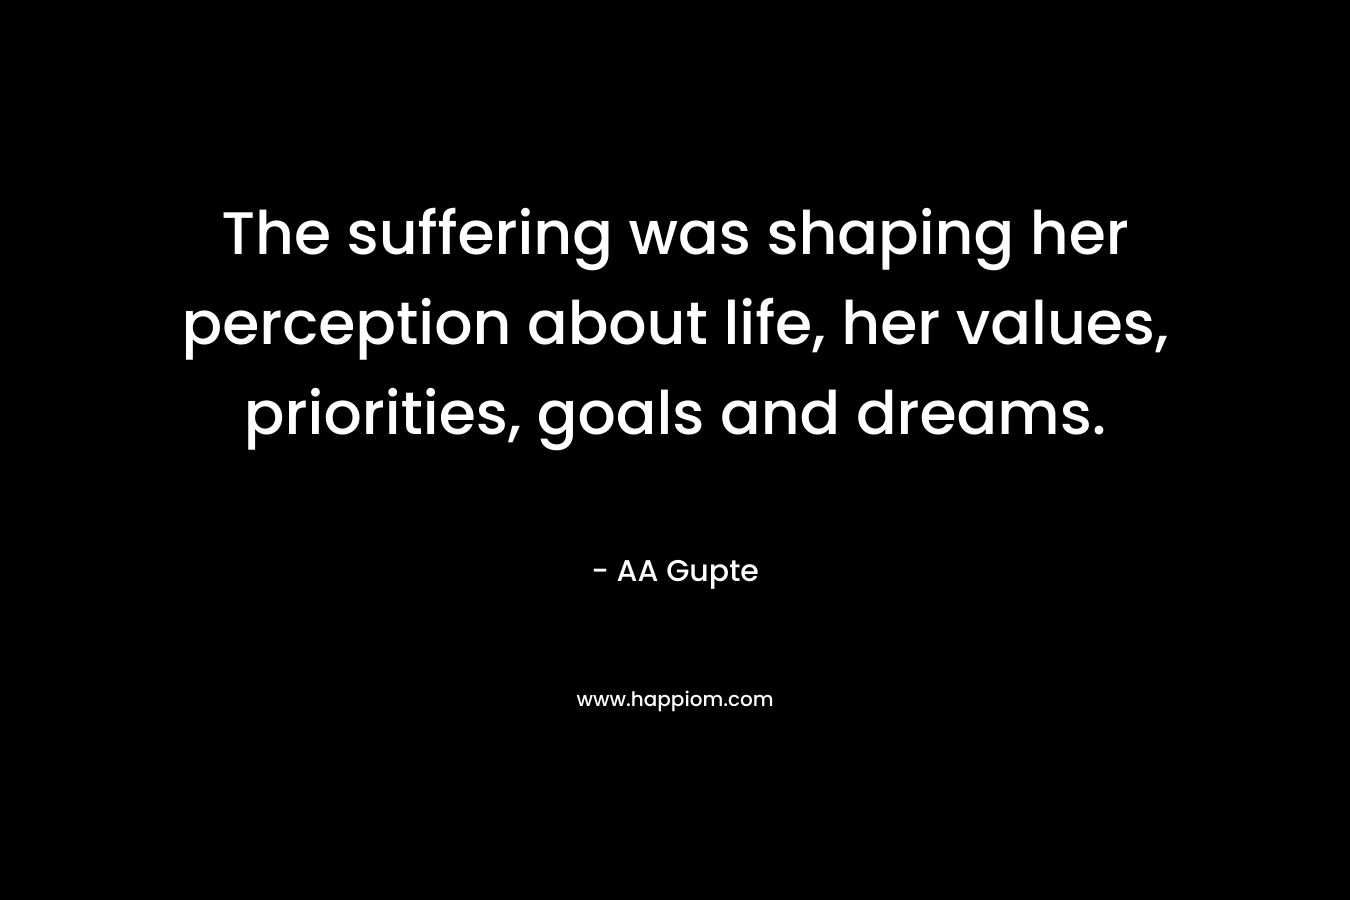 The suffering was shaping her perception about life, her values, priorities, goals and dreams.